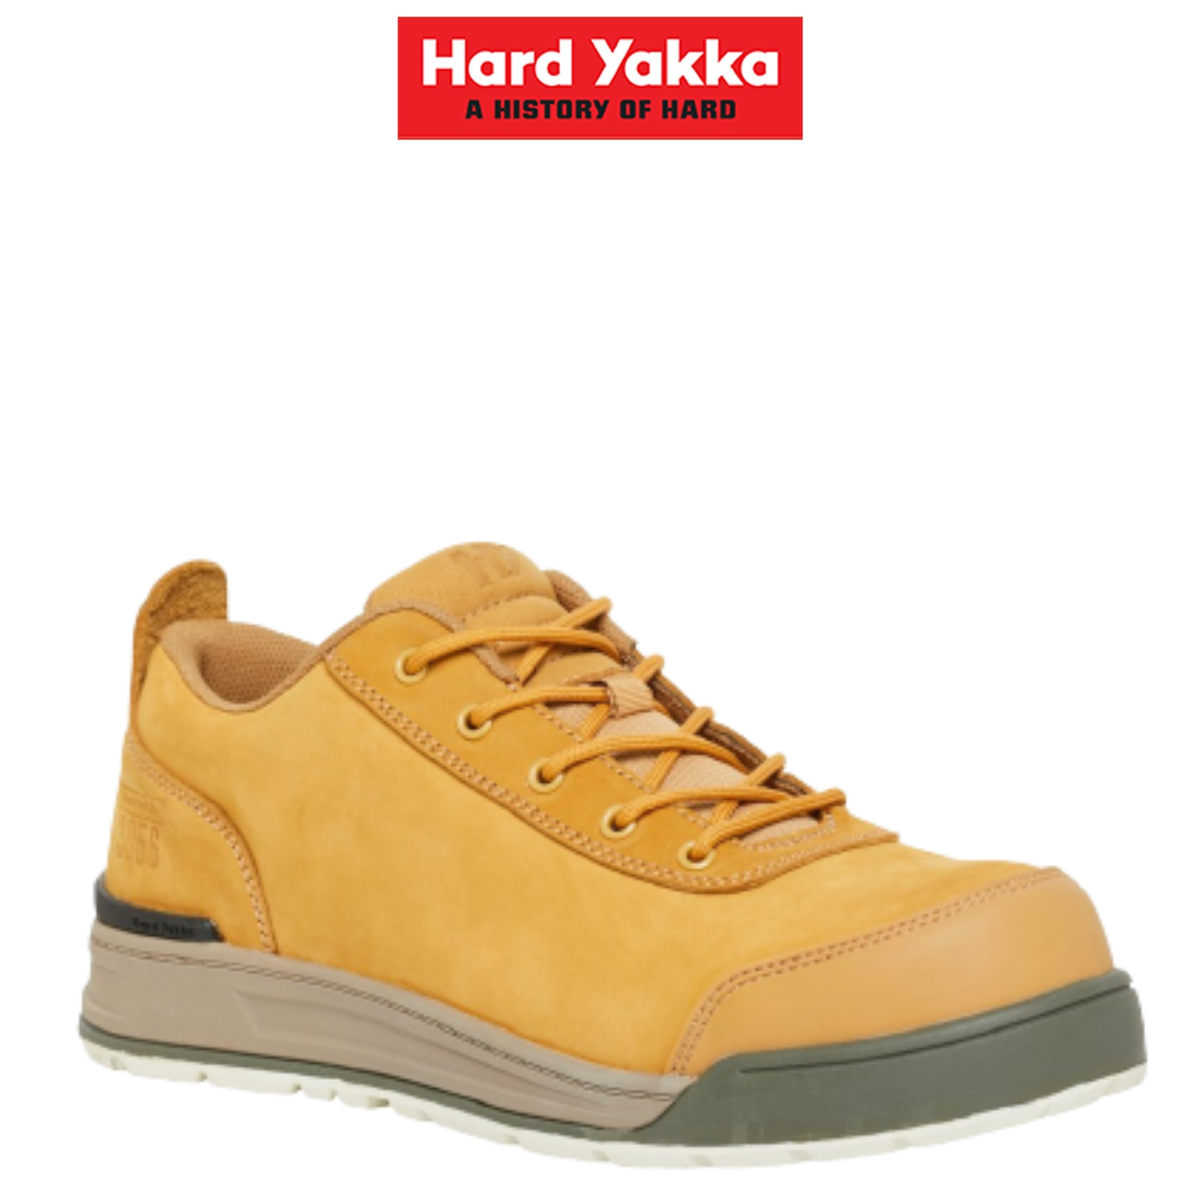 Hard Yakka Mens 3056 Lo Durable Shoes Safety Work Toe Leather Protector Y60113